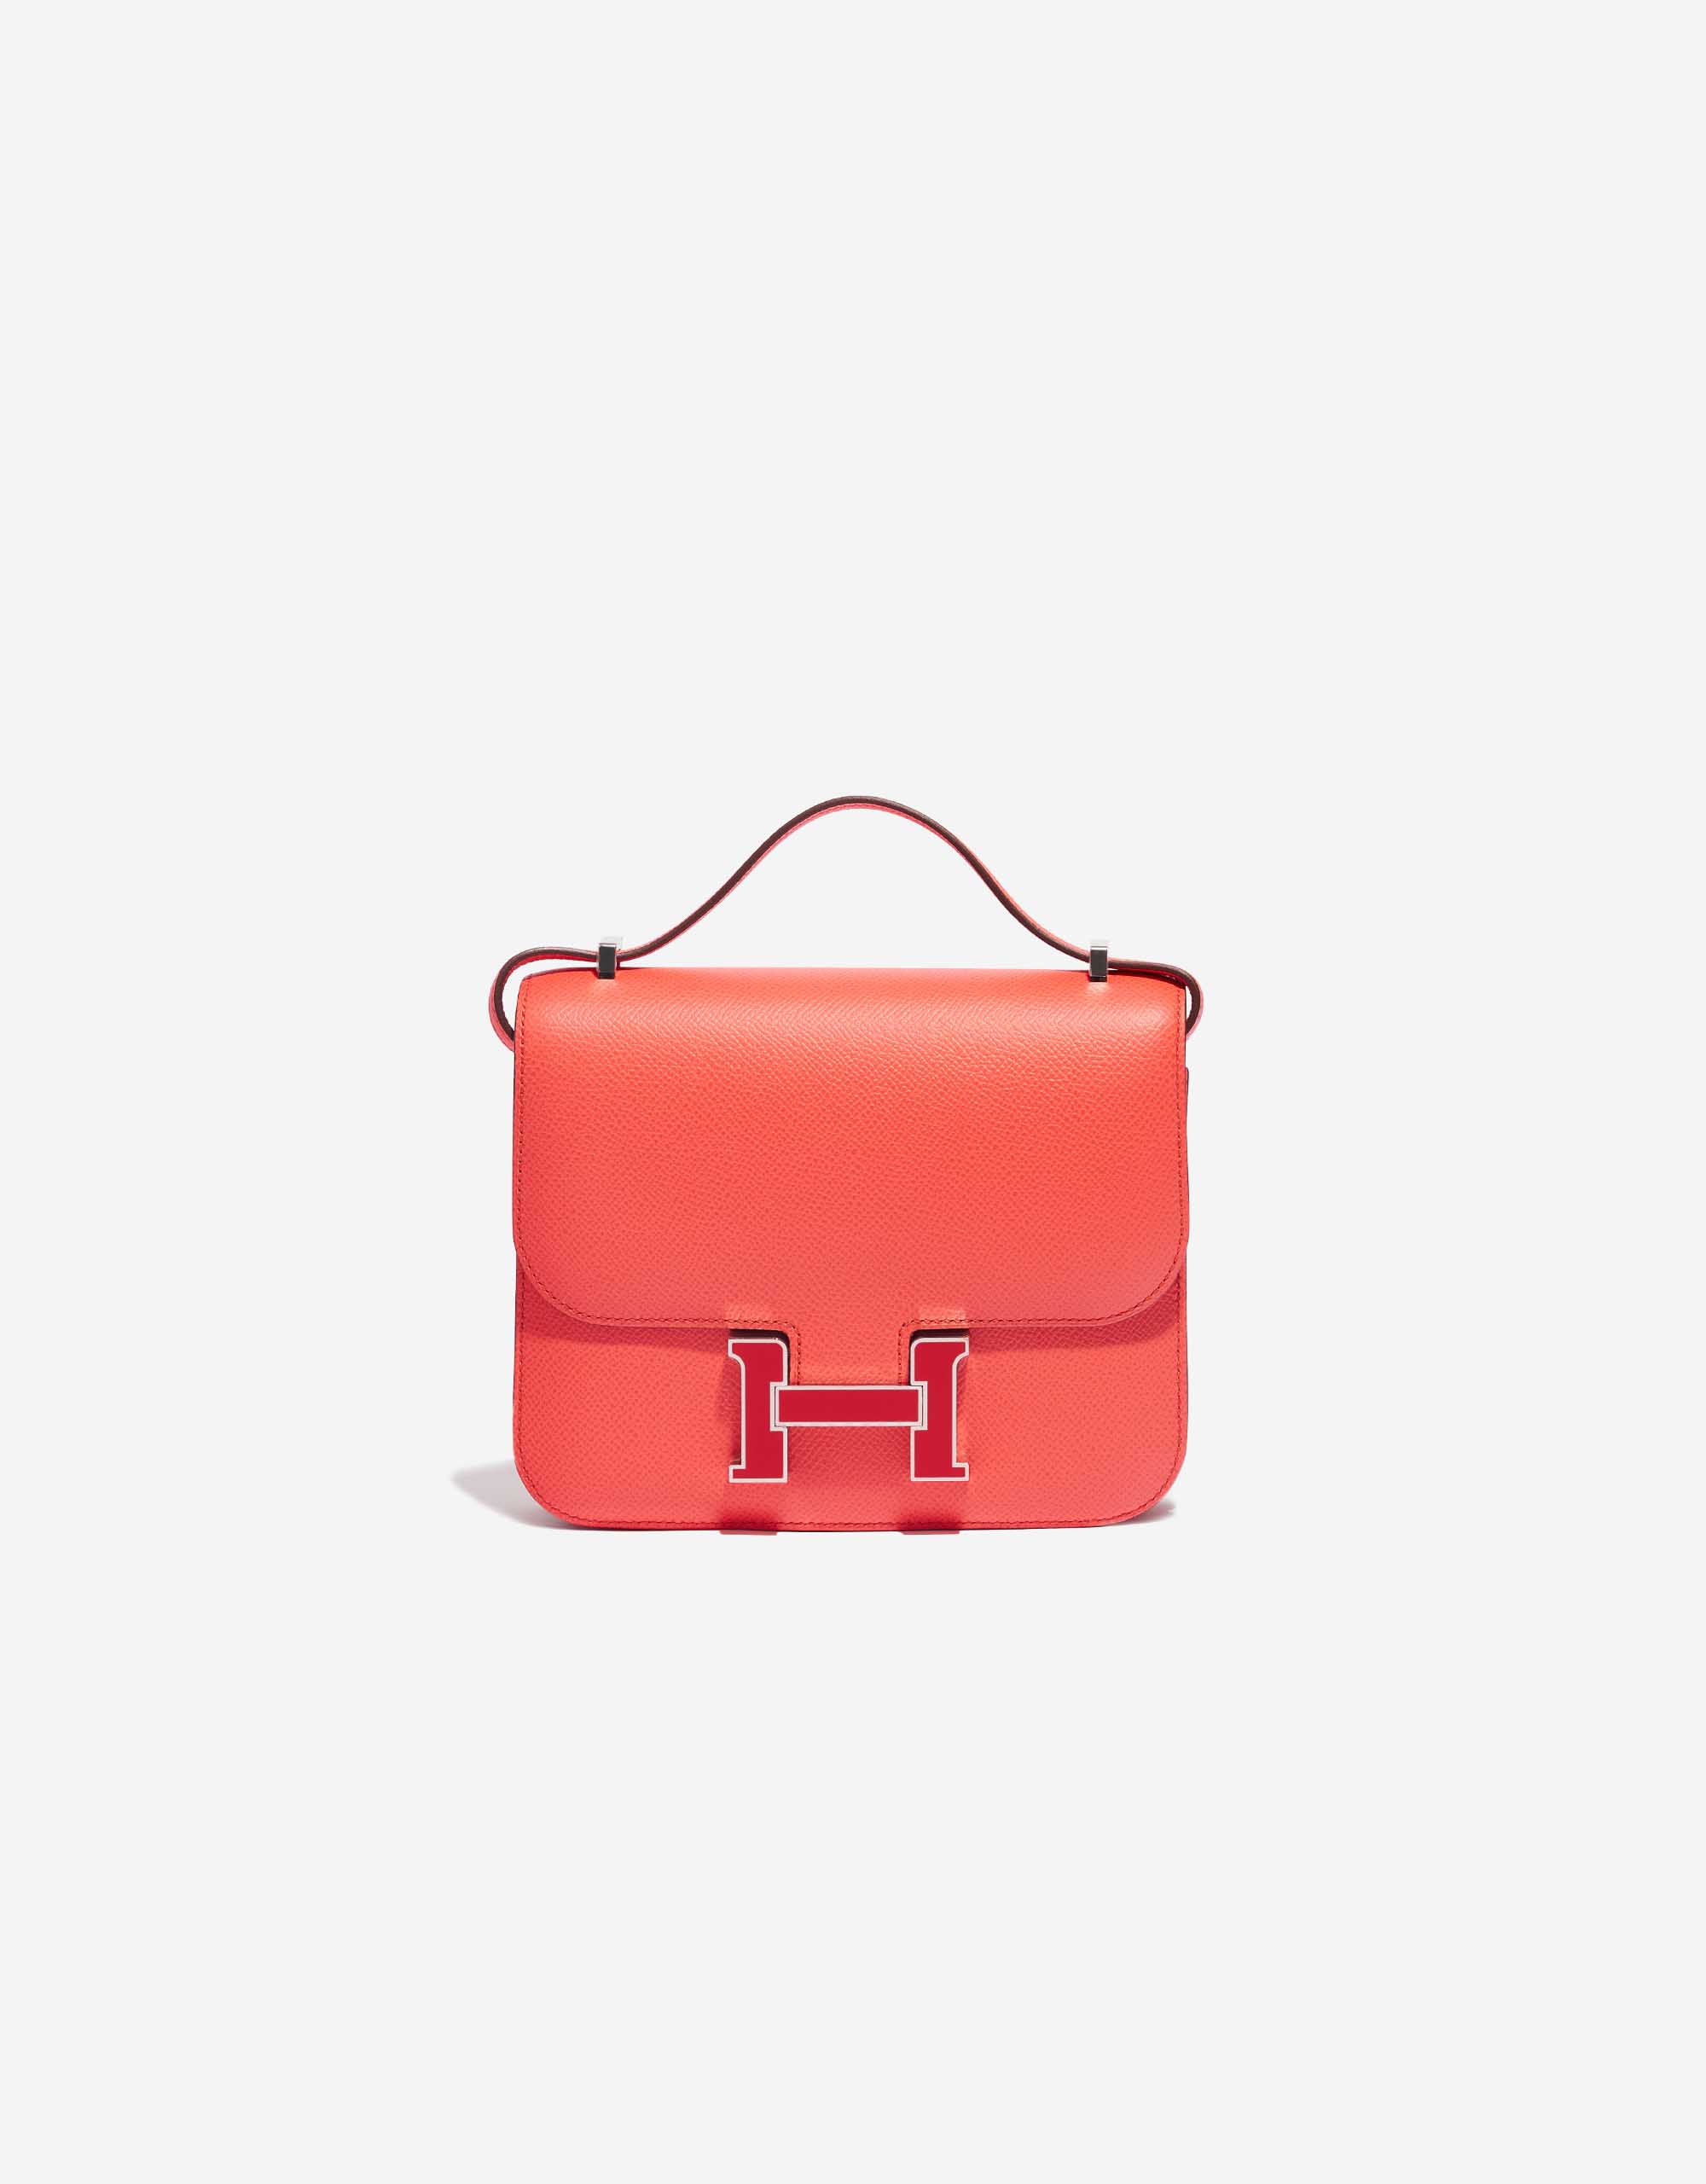 HERMÈS Picotin Cargo 18 handbag in Rose Texas and Rouge Sellier